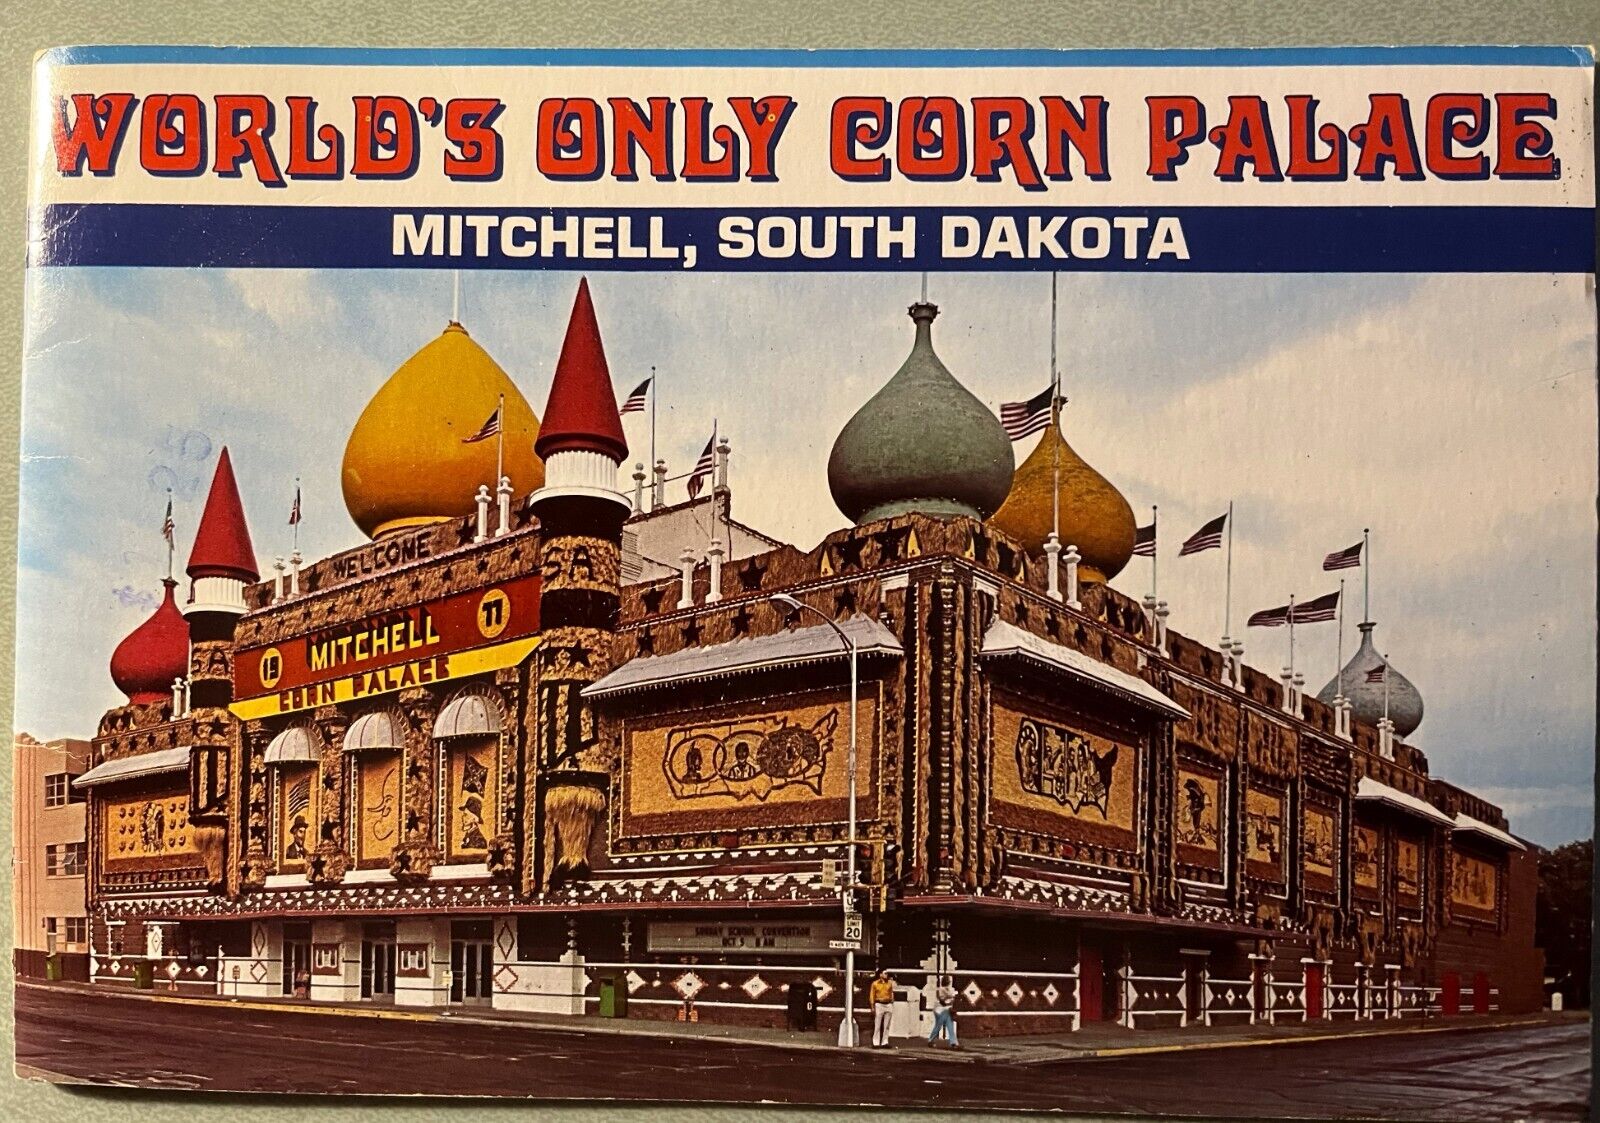 '74 The World's Only Corn Palace Headliner 14pg color Brochure 1892-1975 History